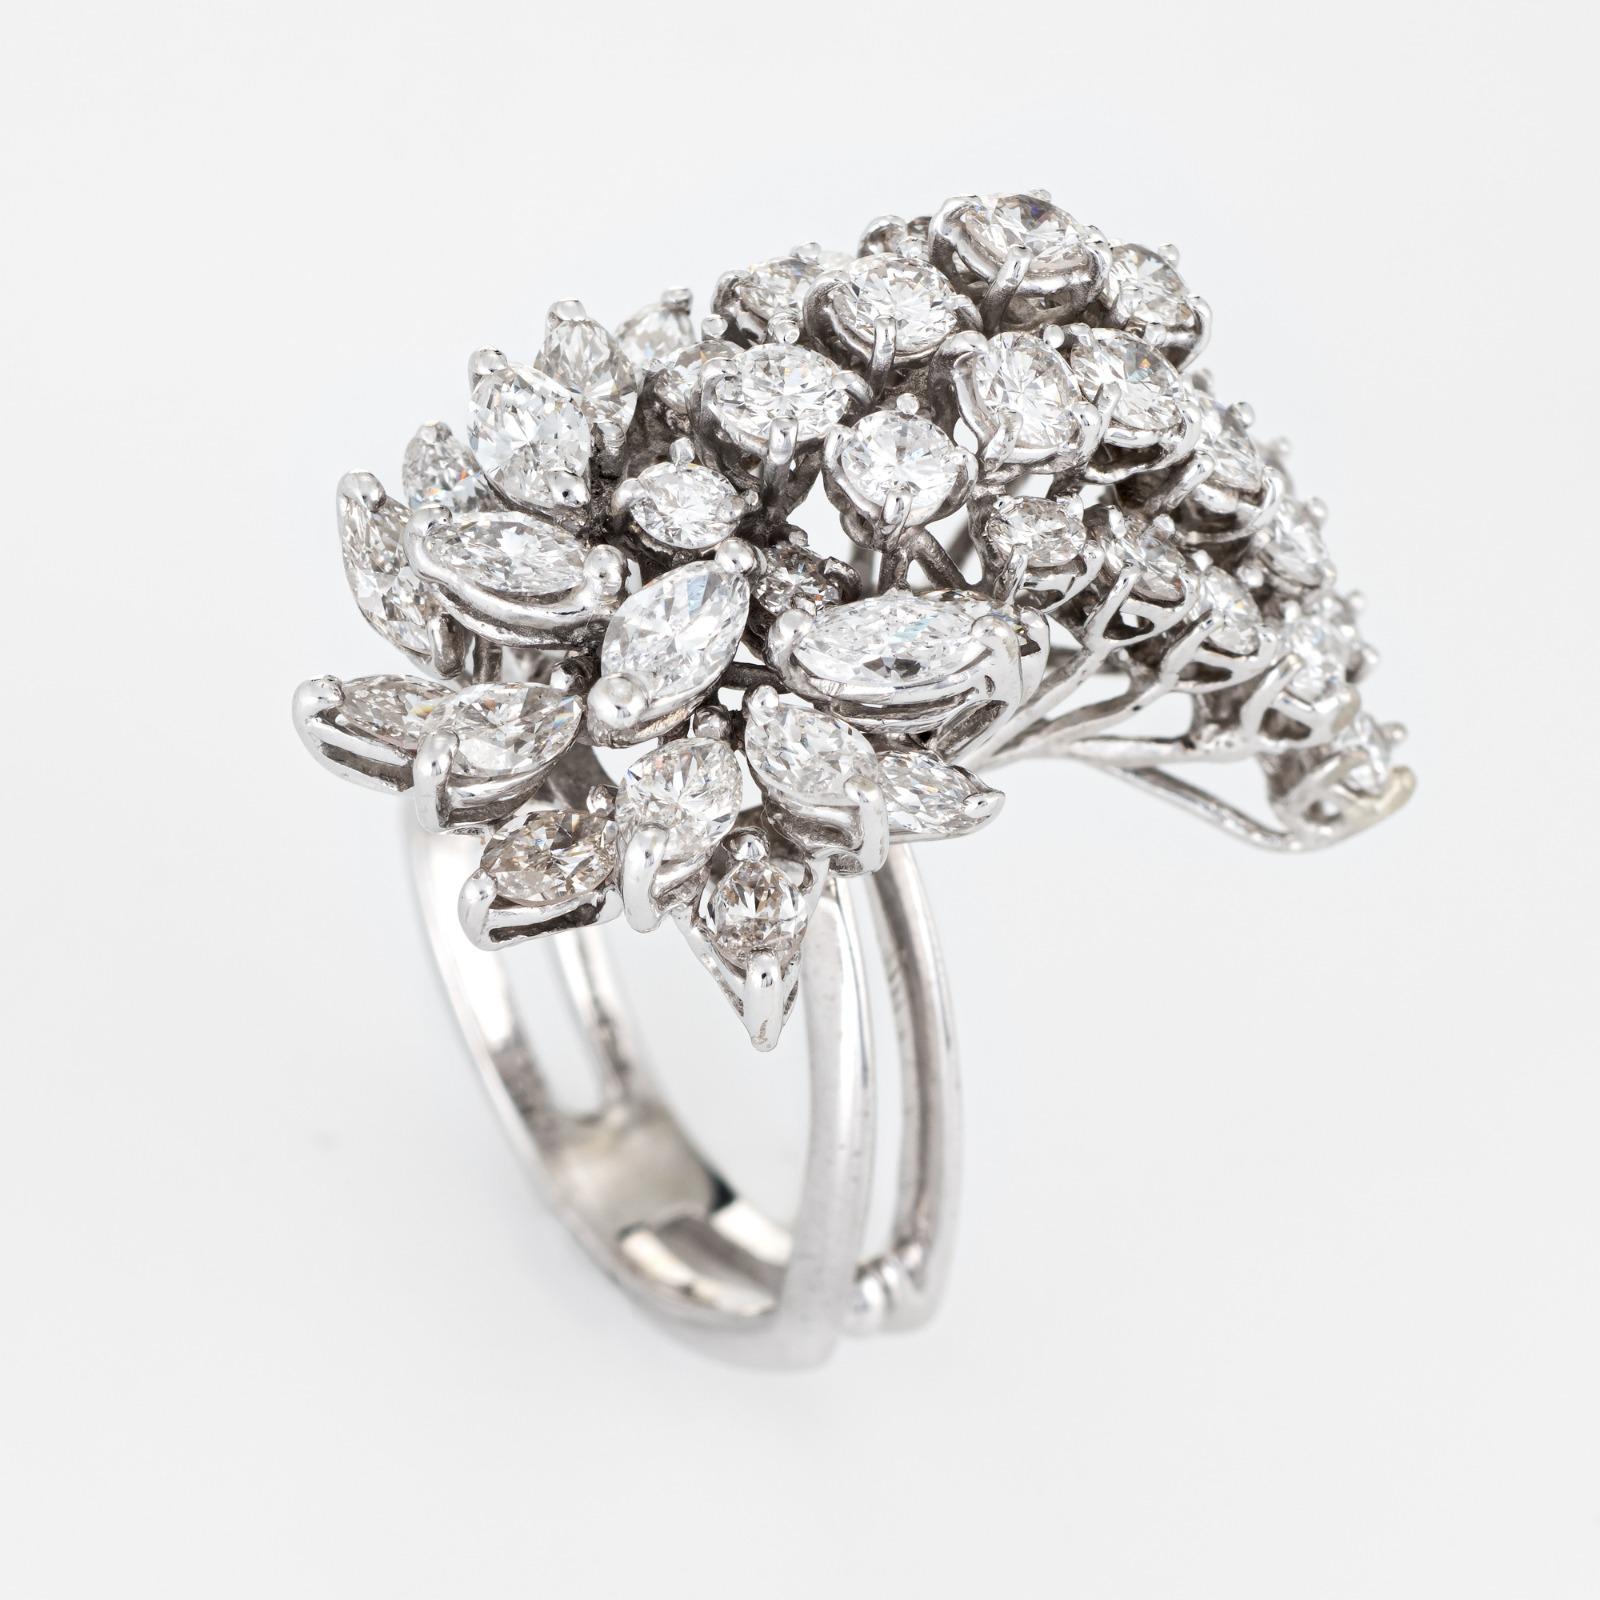 Elaborate vintage mid century cocktail ring (circa 1950s to 1960s), crafted in 14 karat white gold. 

An estimated 3.52 carats of marquise and round brilliant cut diamonds adorn the mount (estimated at G-H color and SI1-2 clarity).

The showstopper